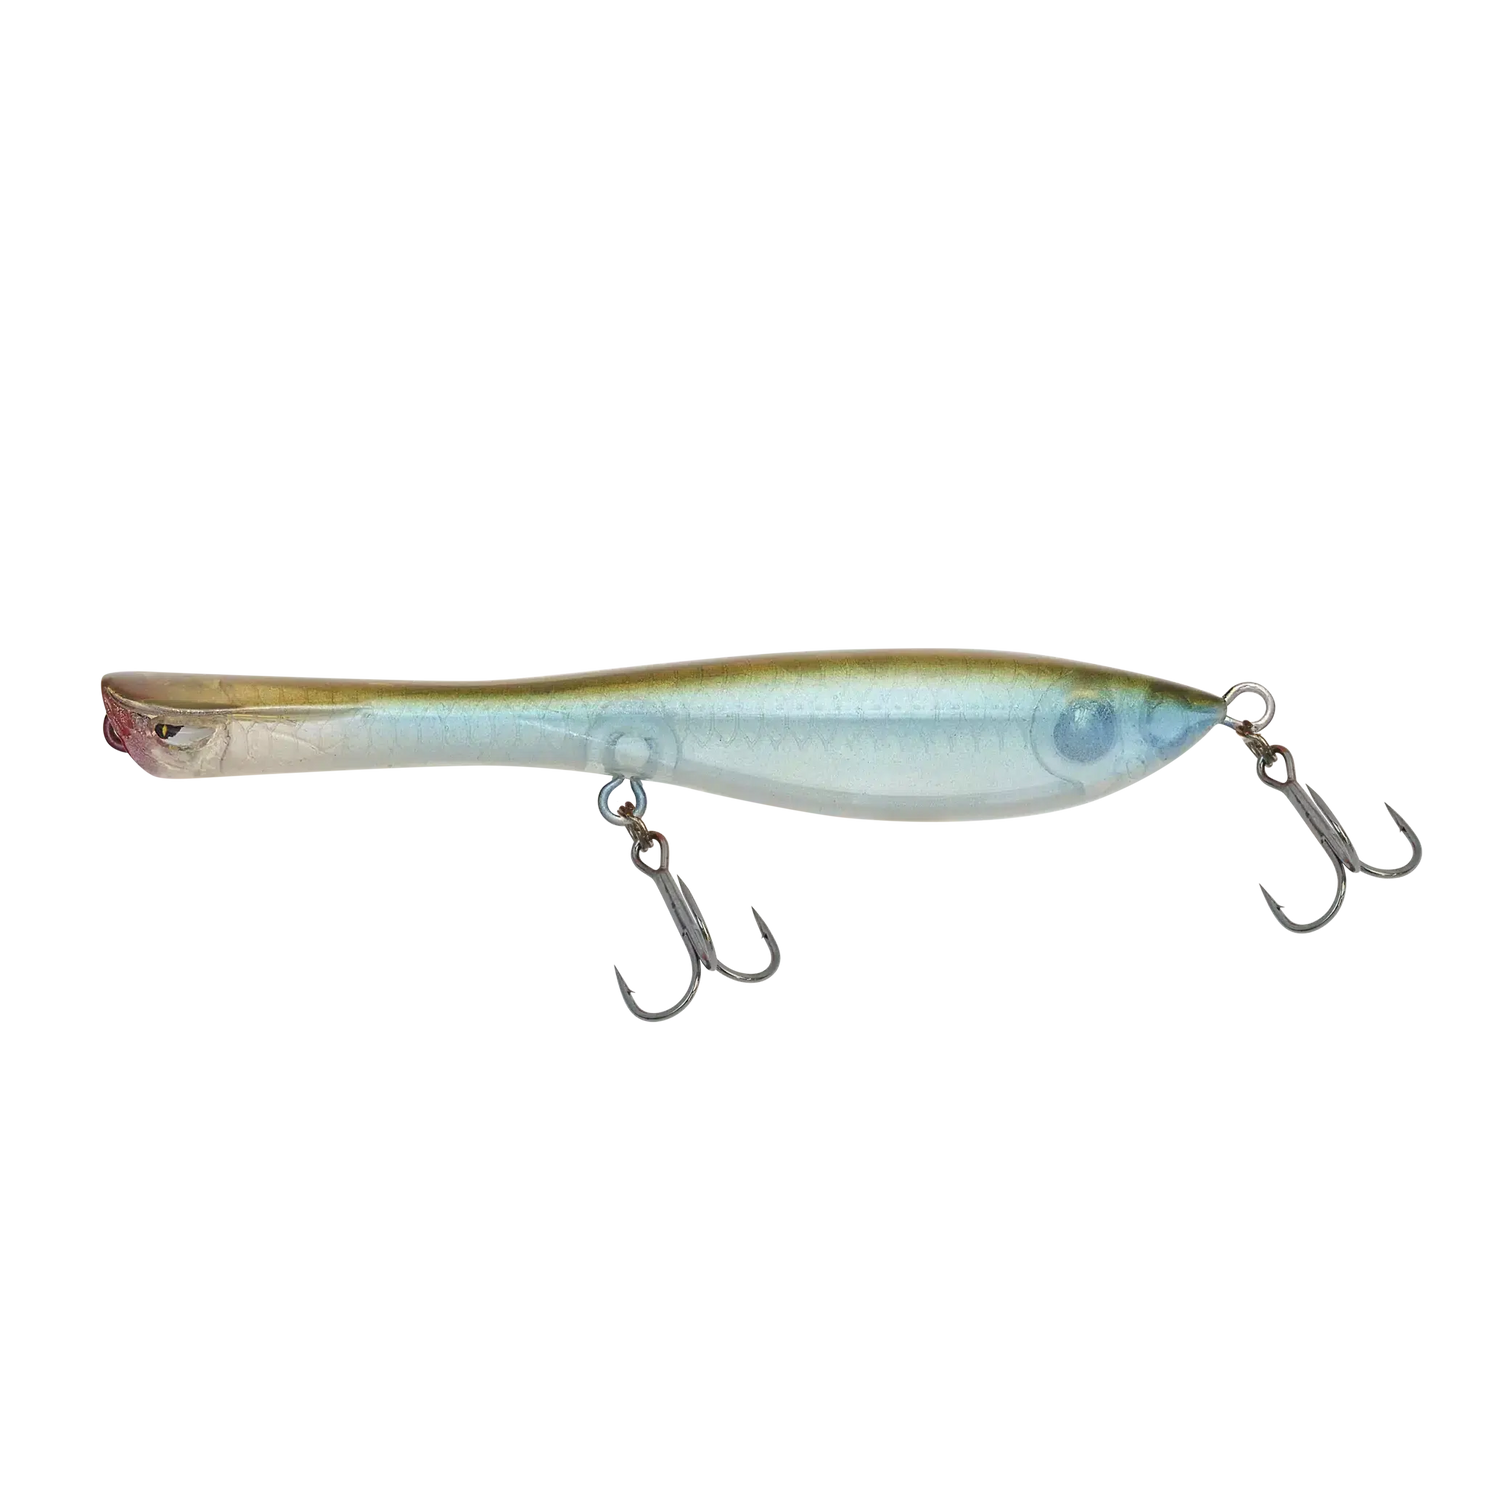 Nomad Dartwing Floating 70-Lure - Poppers, Stickbaits & Pencils-Nomad-Aqua Ghost-Fishing Station